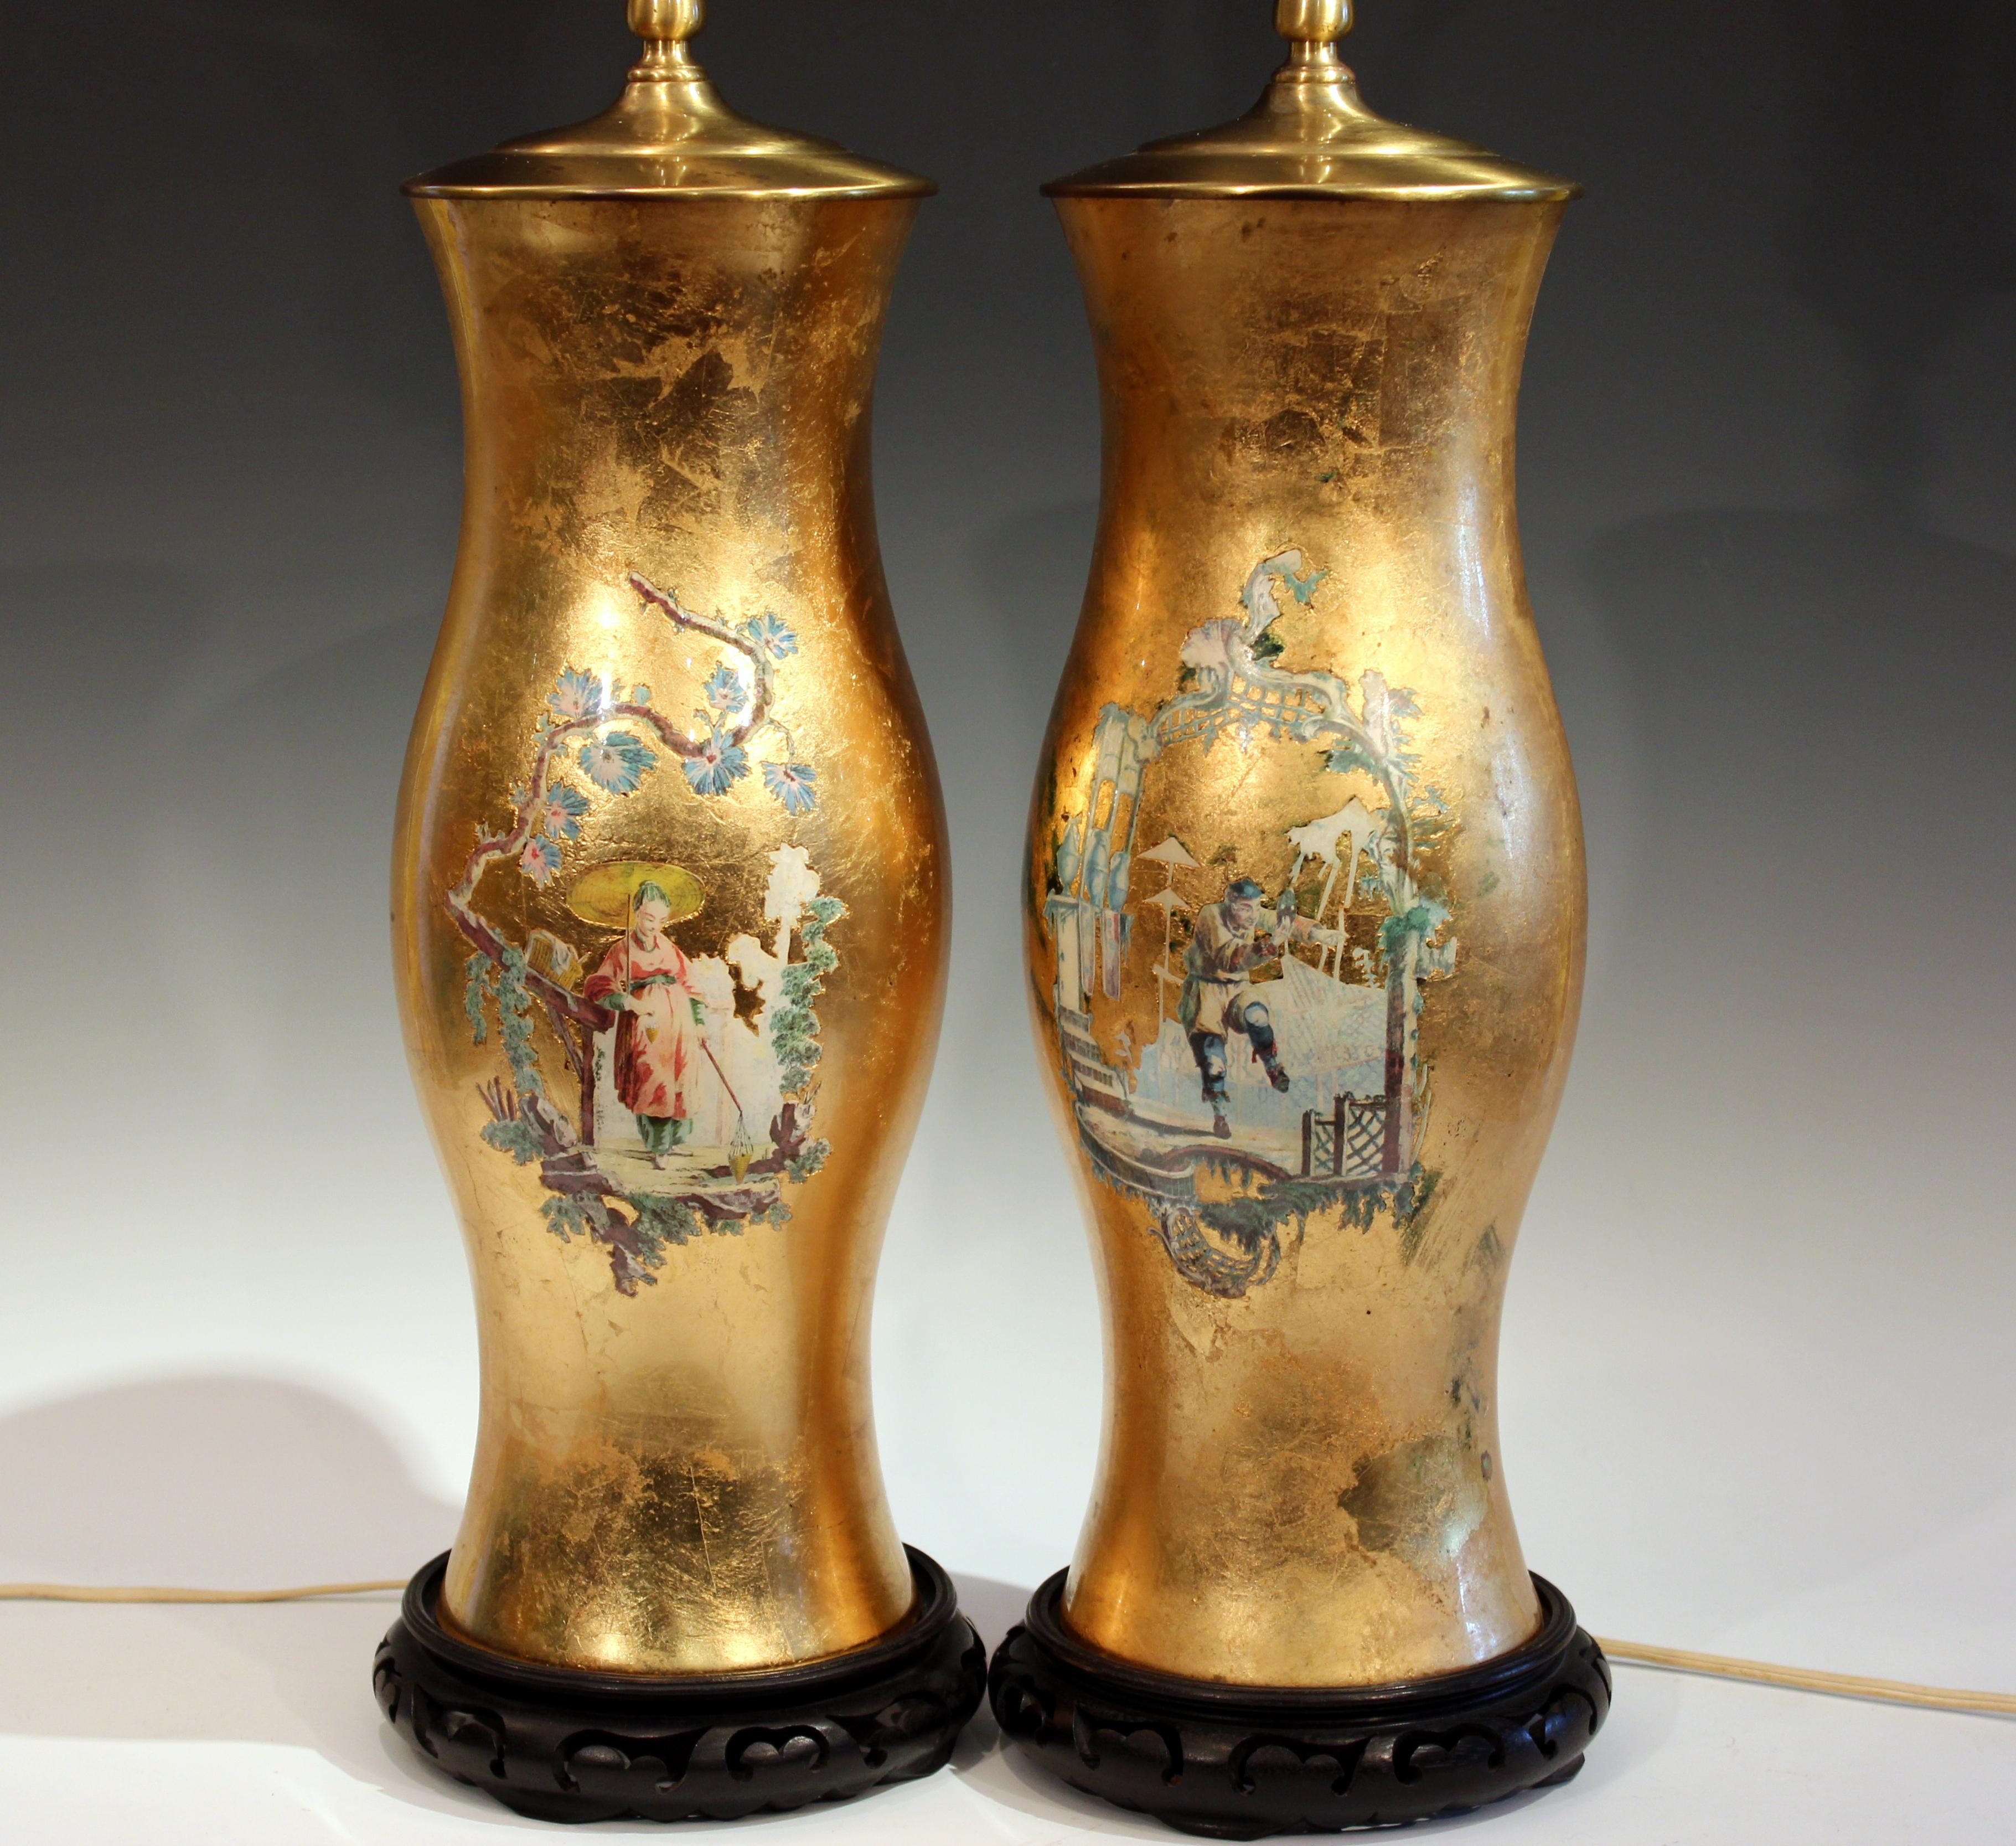 Pair of Large Eglomise Chinoiserie Gilt Decalcomania Vintage Vase Lamps (Chinesisch) im Angebot